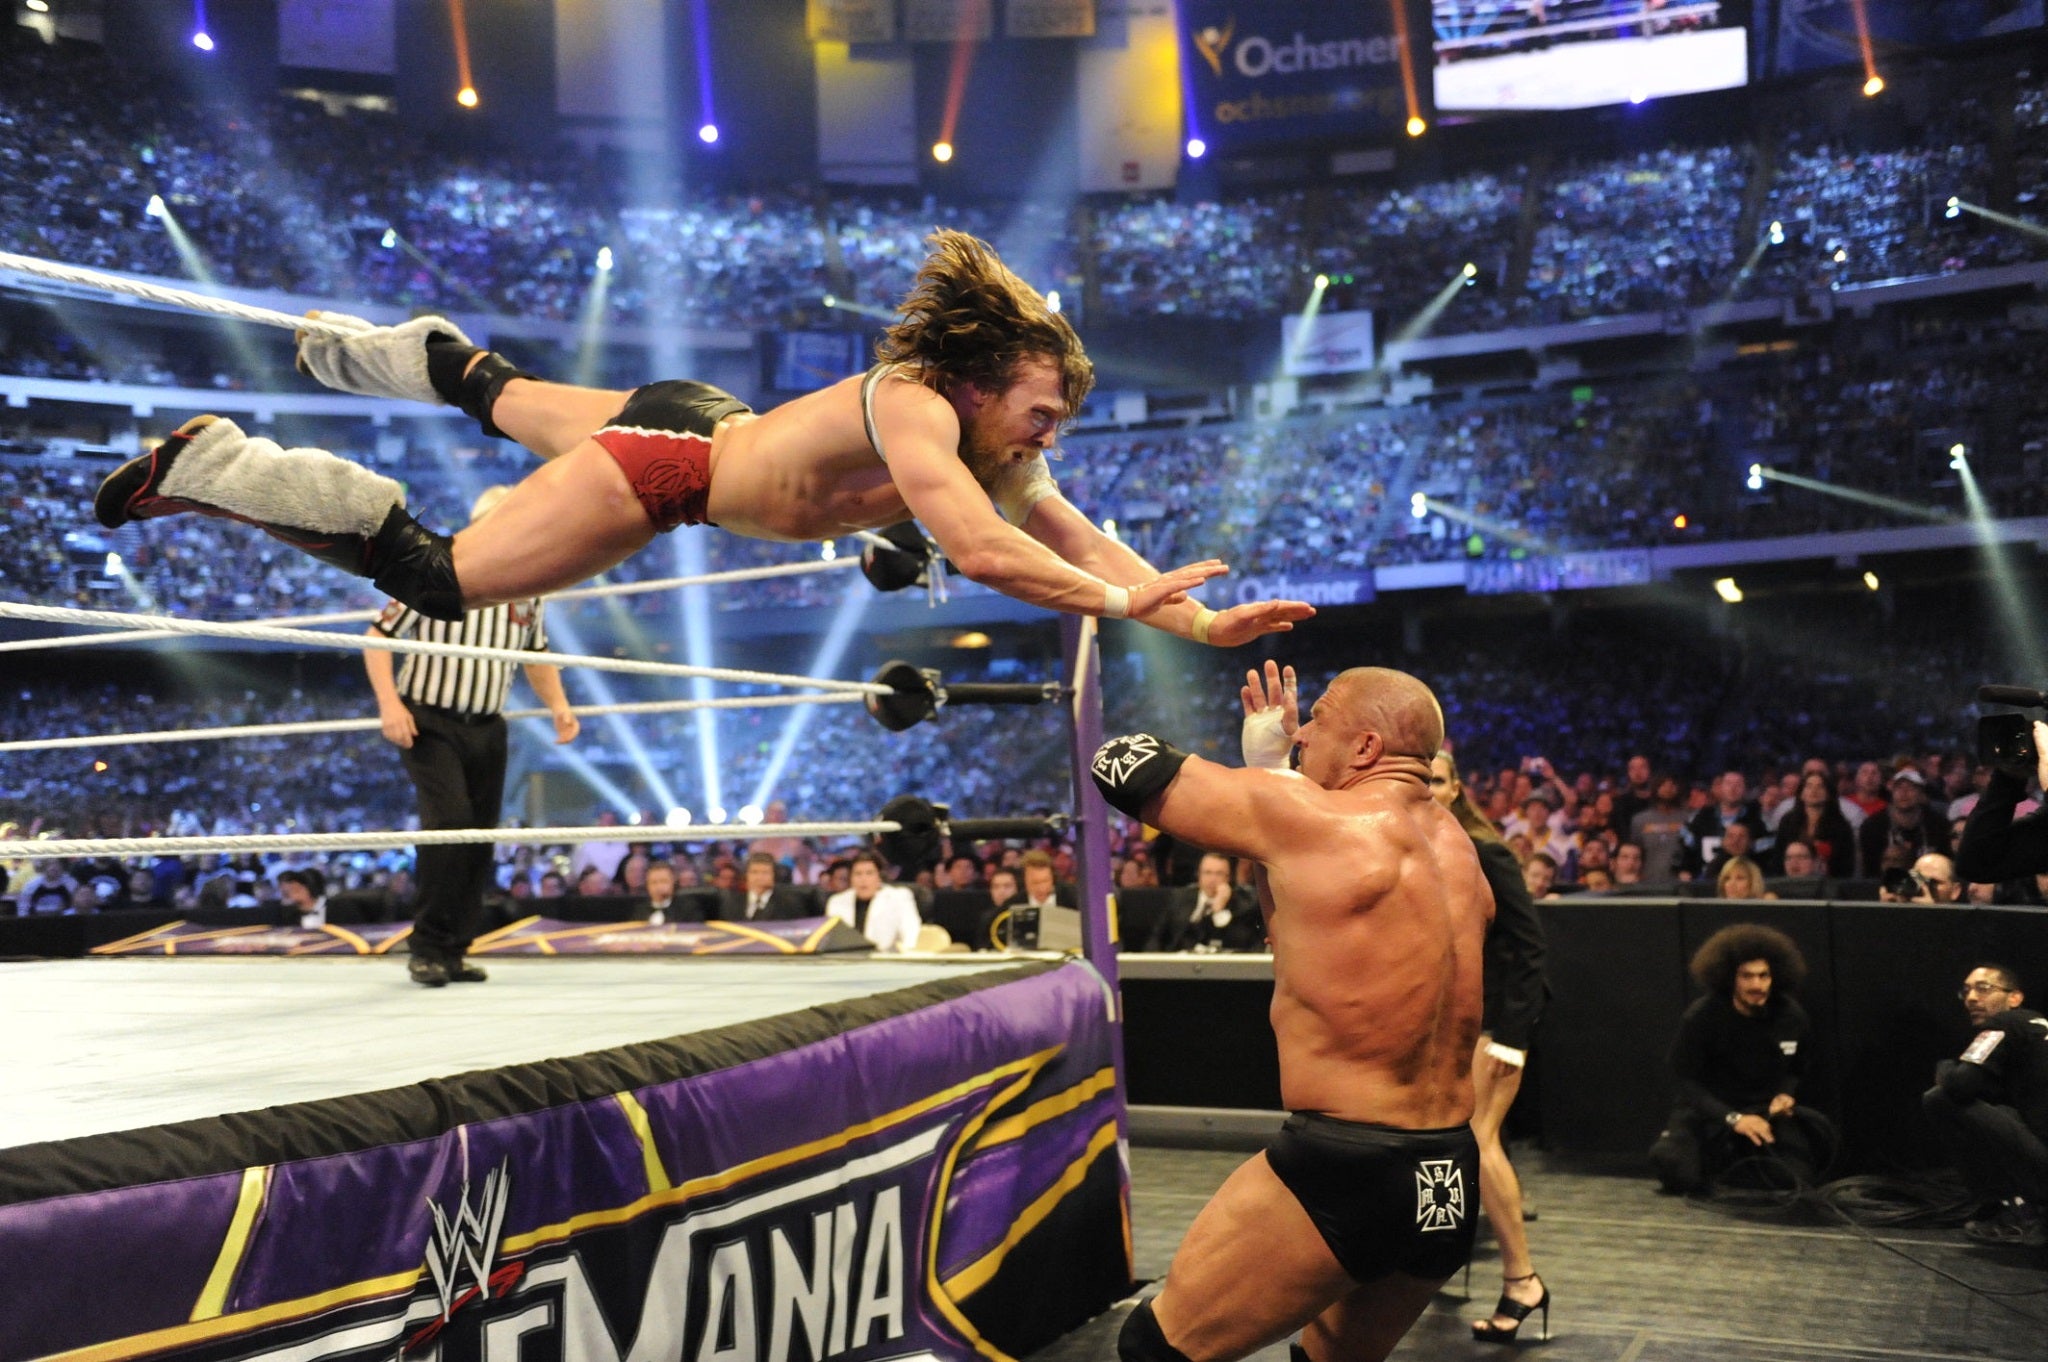 Bryan defeated Triple H at WrestleMania before going on to win the WWE title